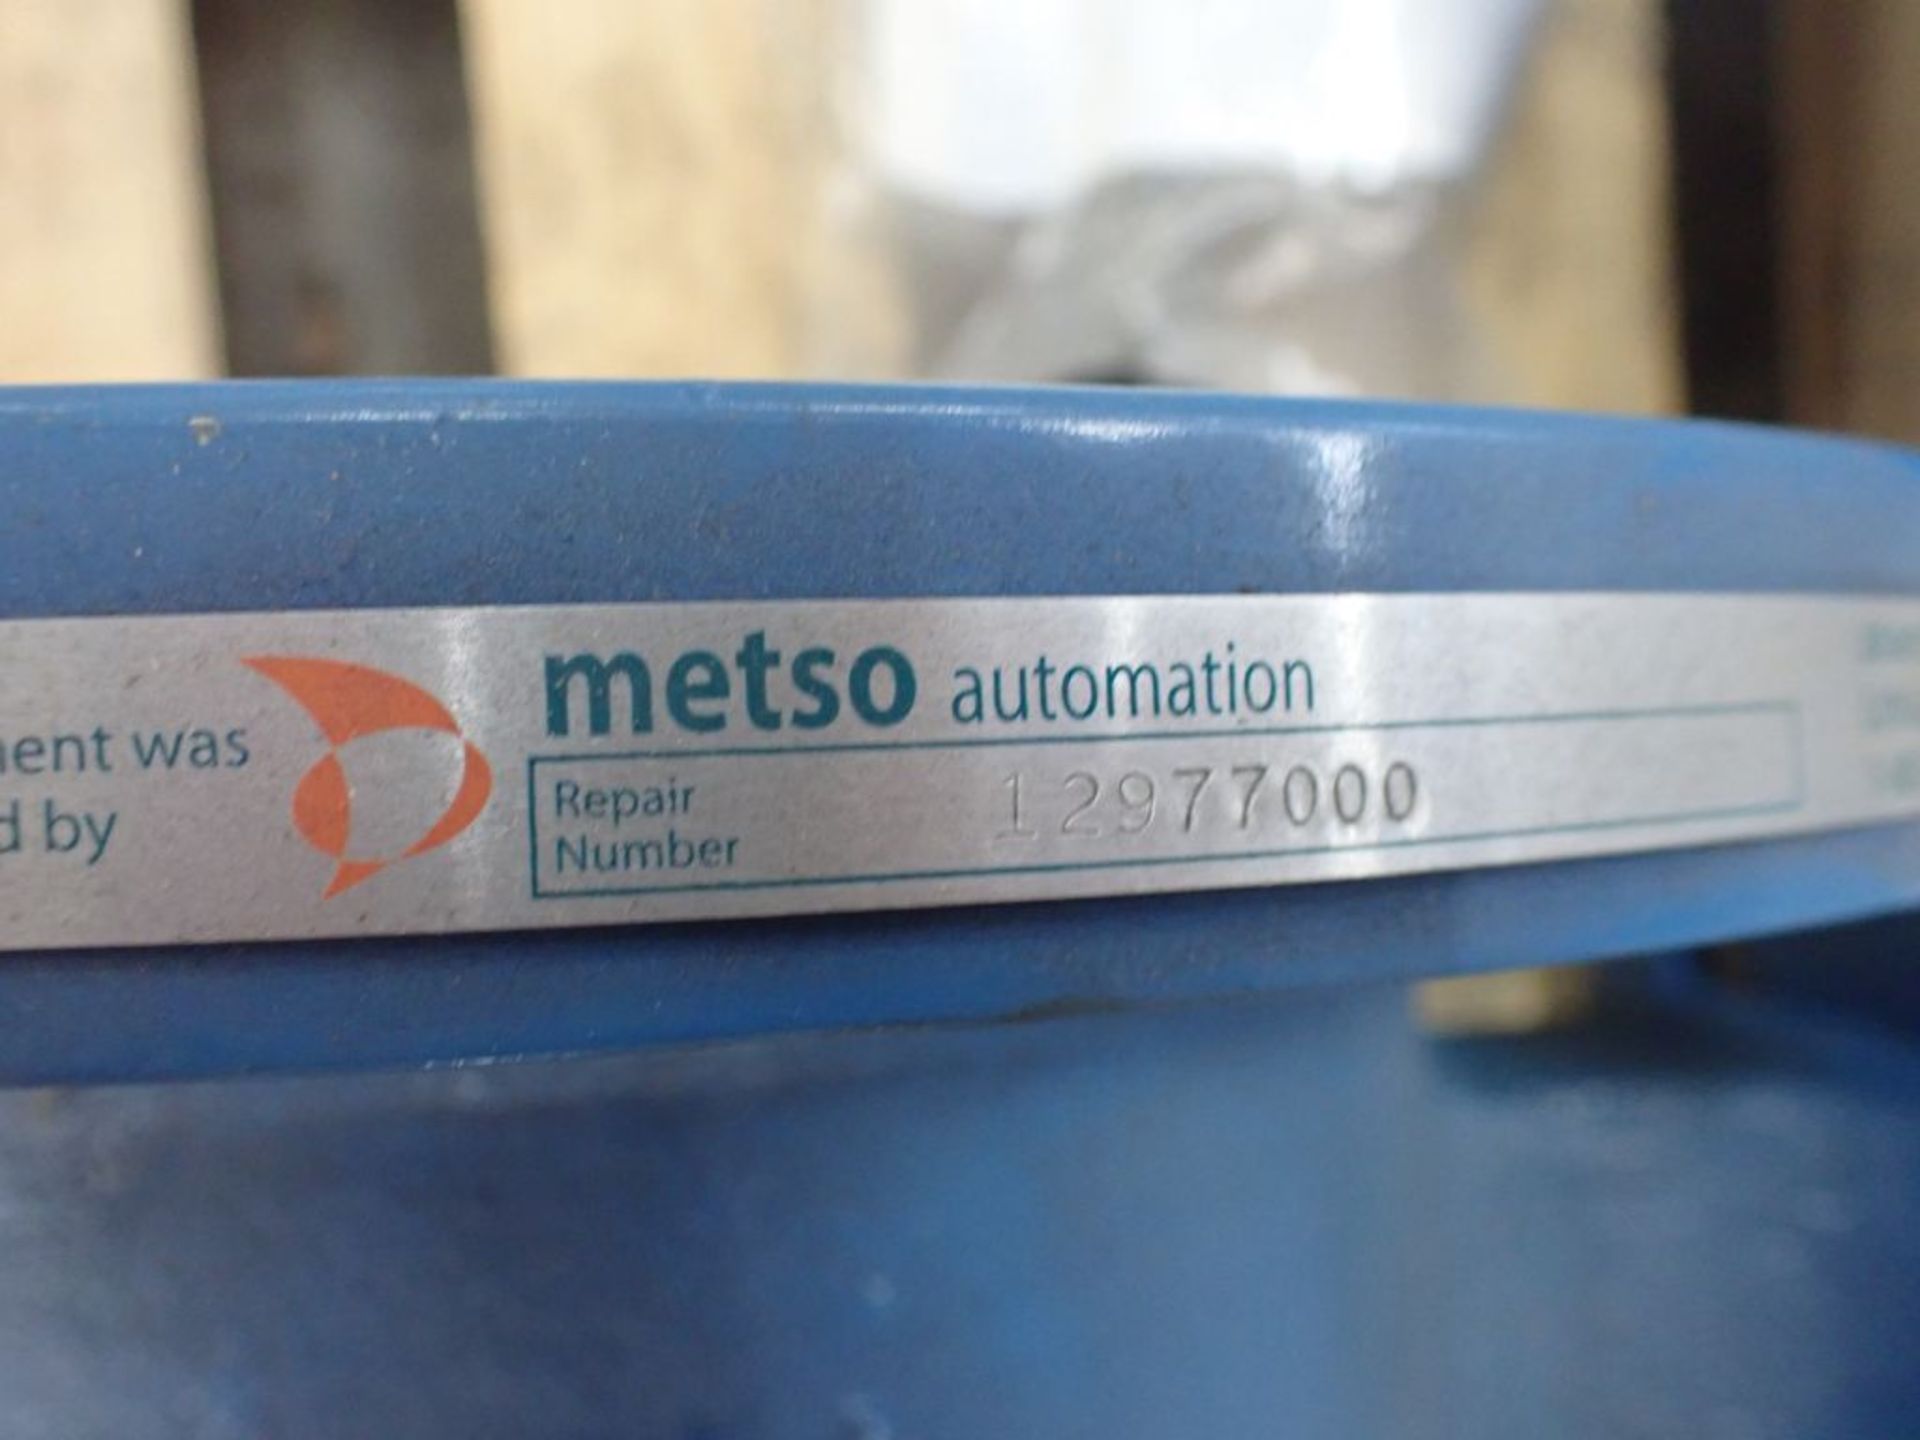 Metso Flanged Valve Segment - Model No. 309C4A; Part No. 10532305; Size: 6" x 8"; Tag: 215781 - Image 7 of 9